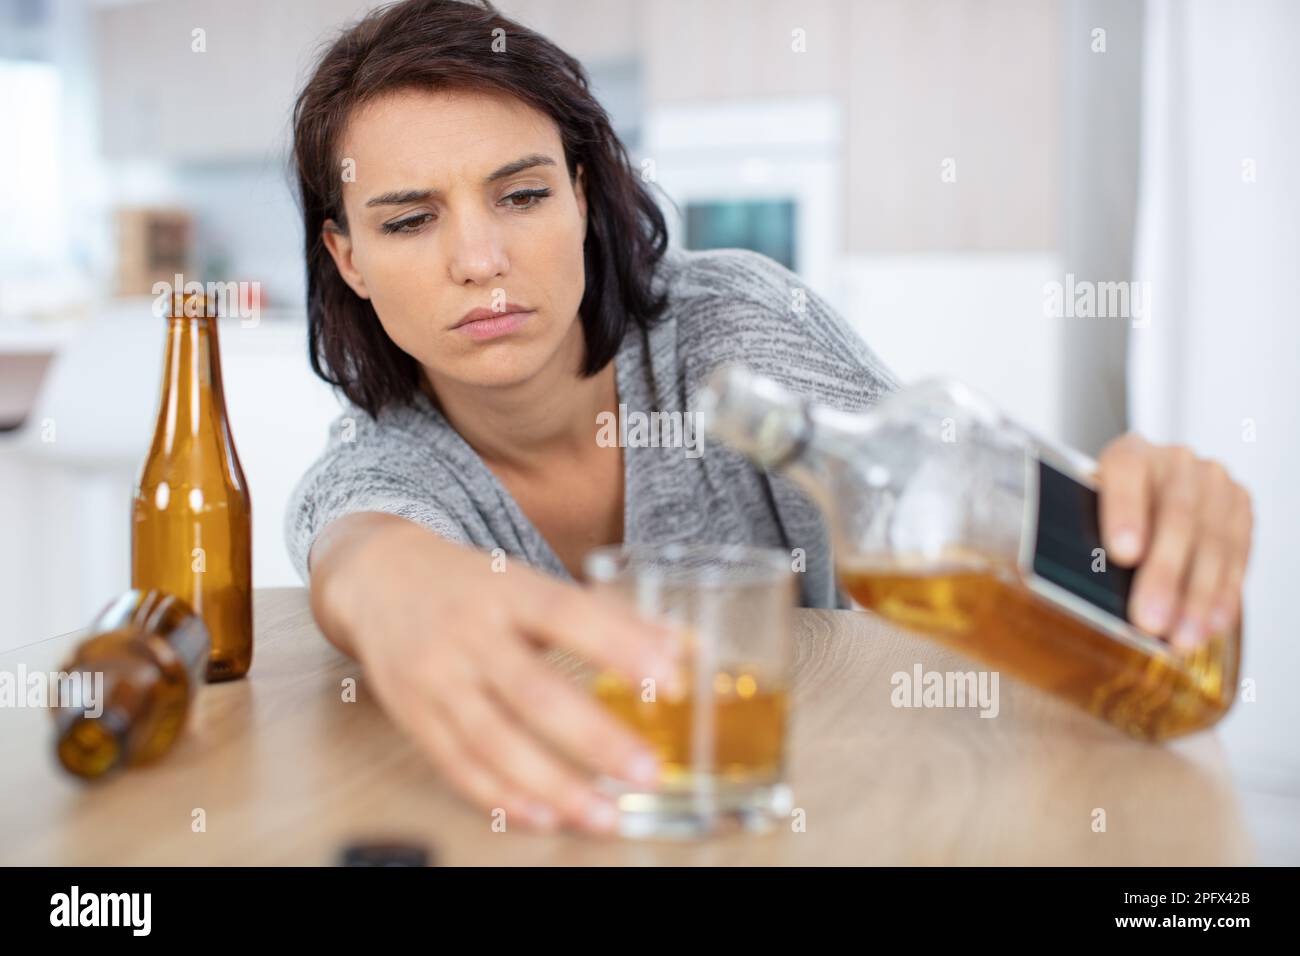 lonely and thirsty woman having a problem with alcohol Stock Photo